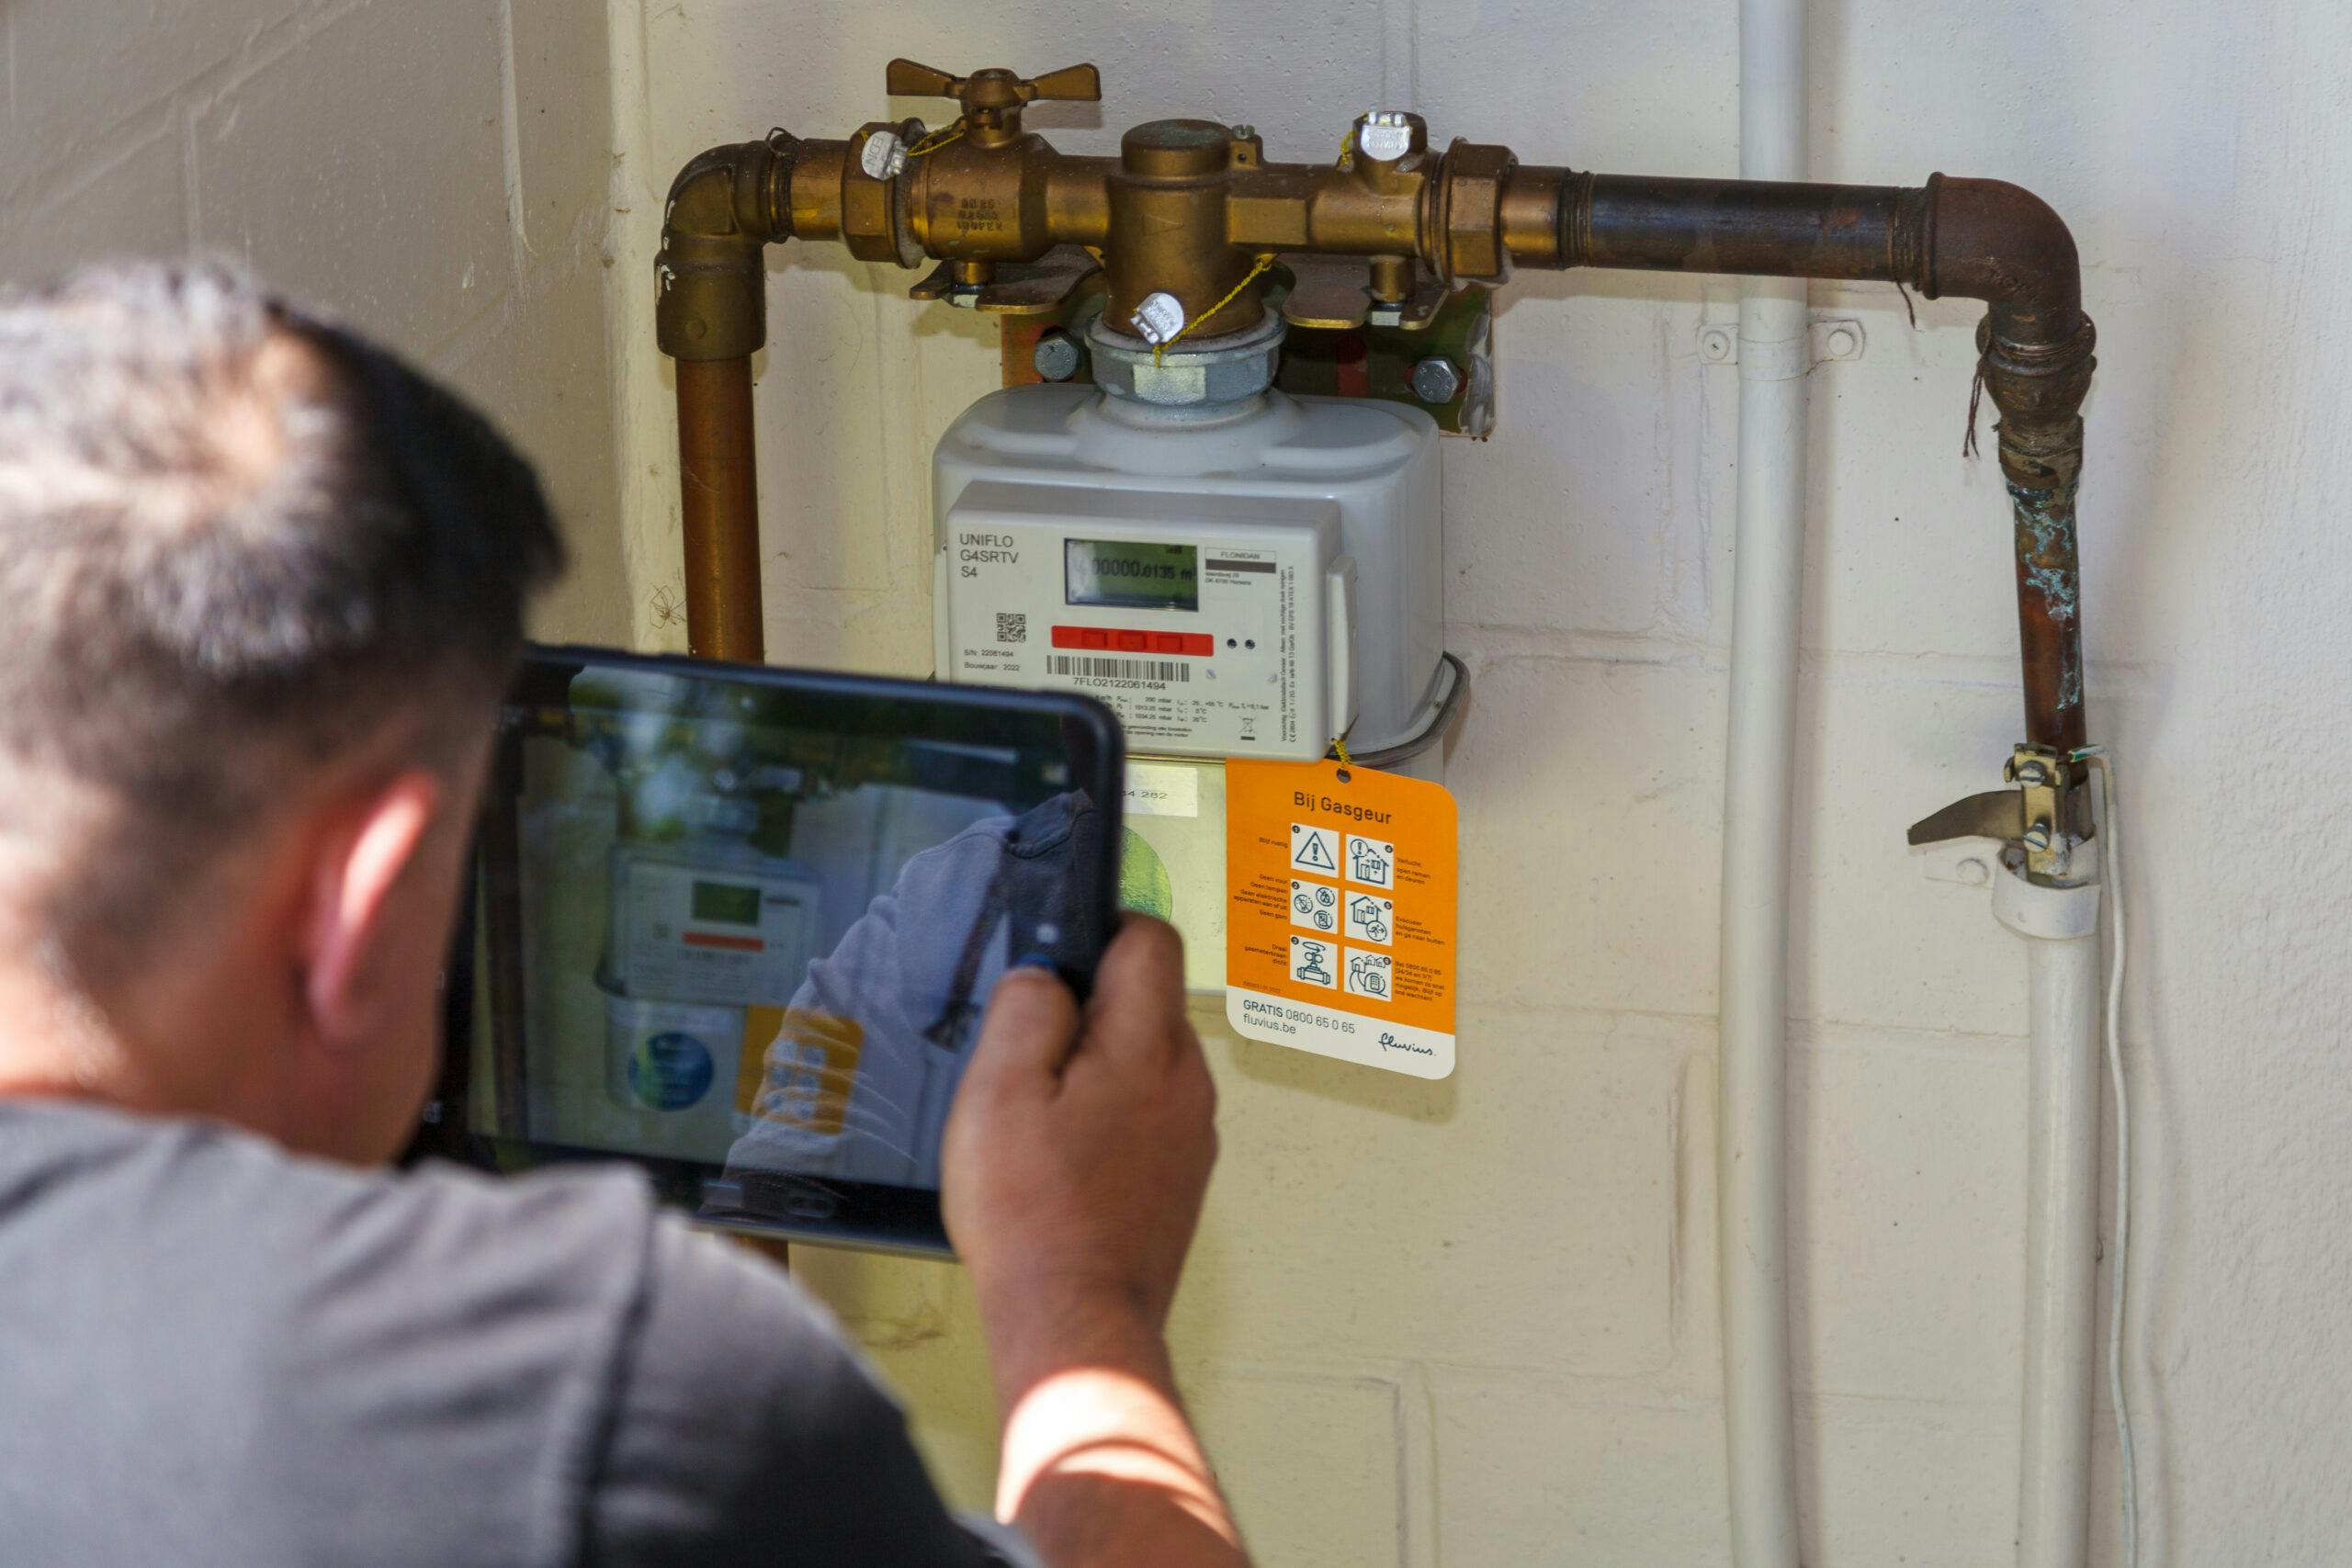 Unit-T Field worker taking a picture of a water smart meter on a tablet with Deepomatic's Computer Vision Technology integrated